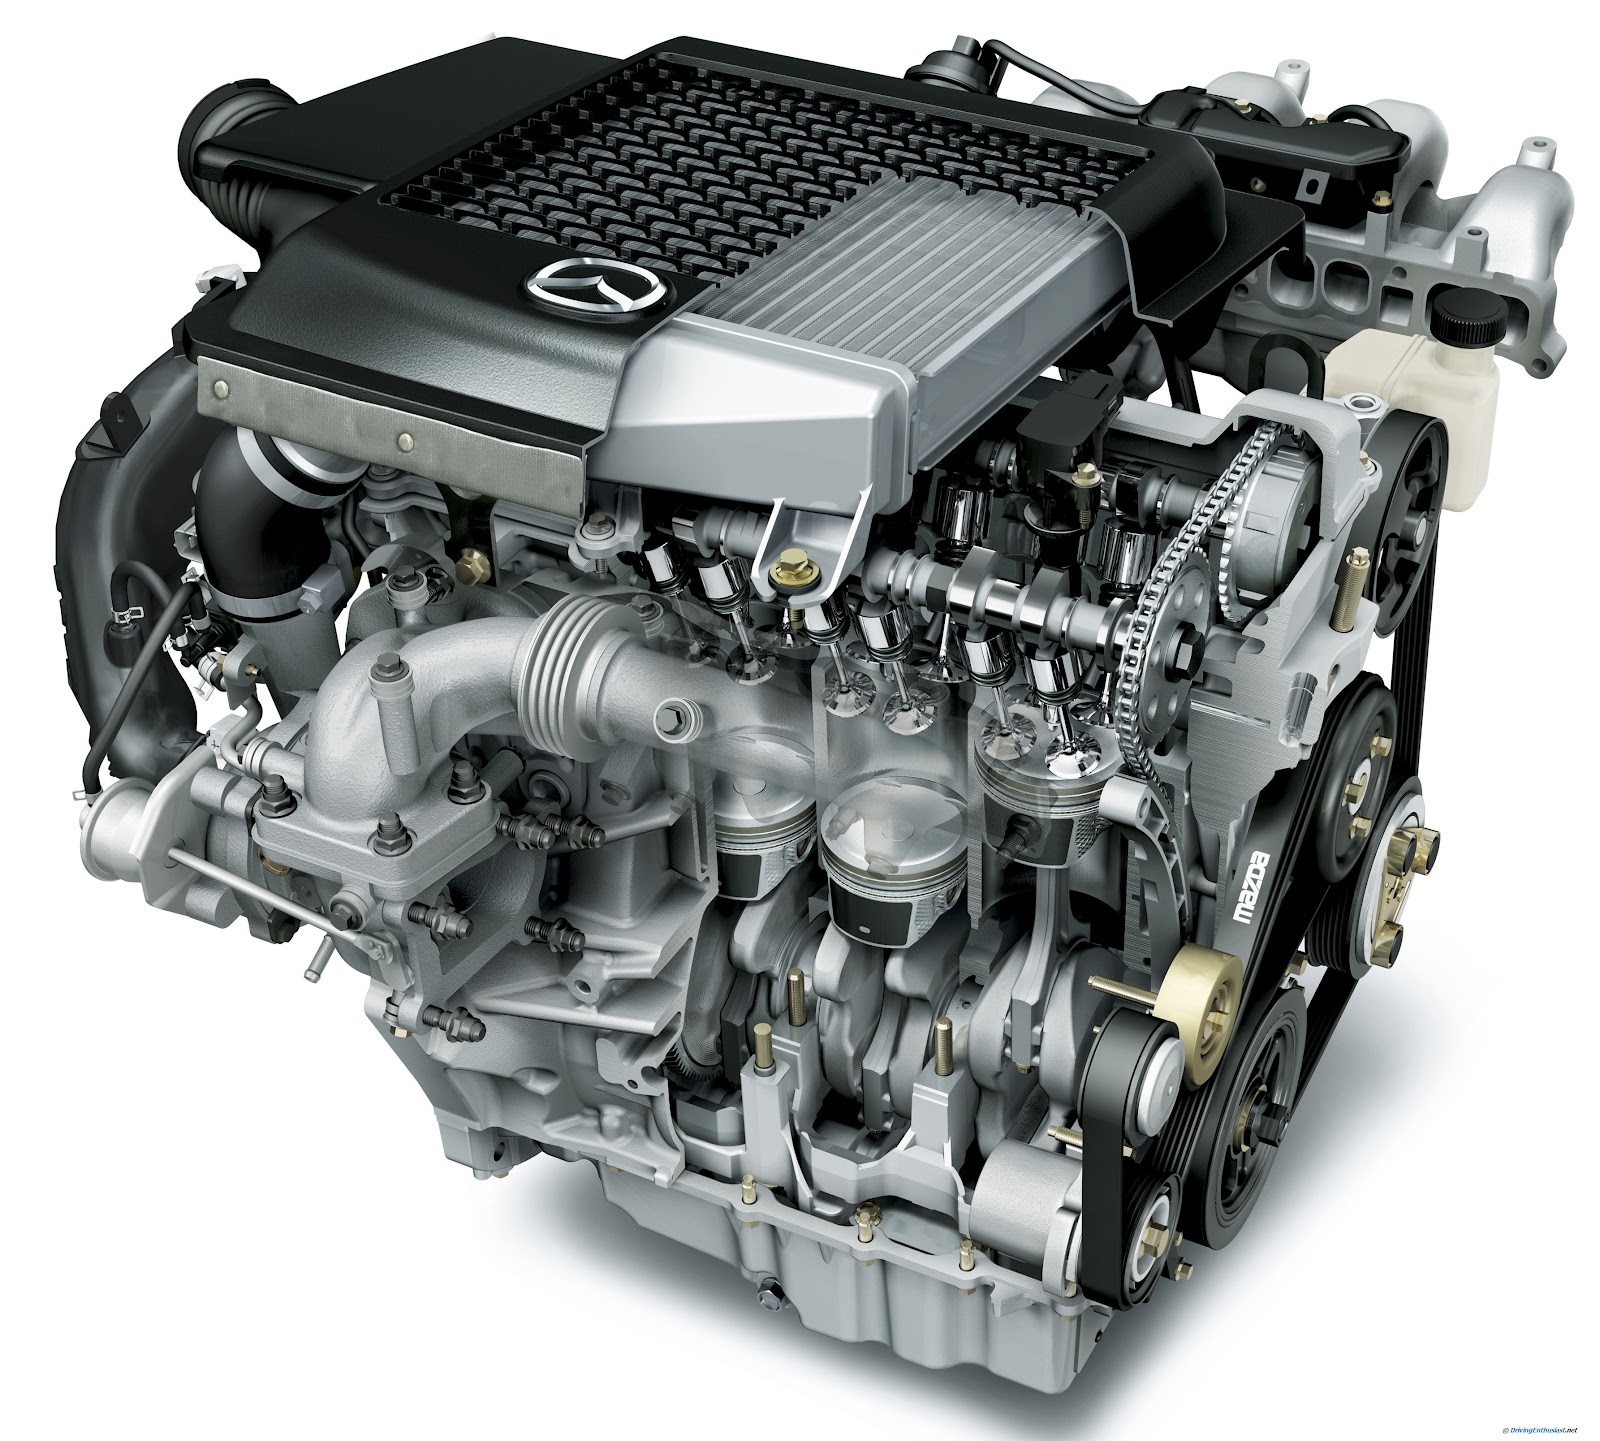 Gas Engines: Used car engines available